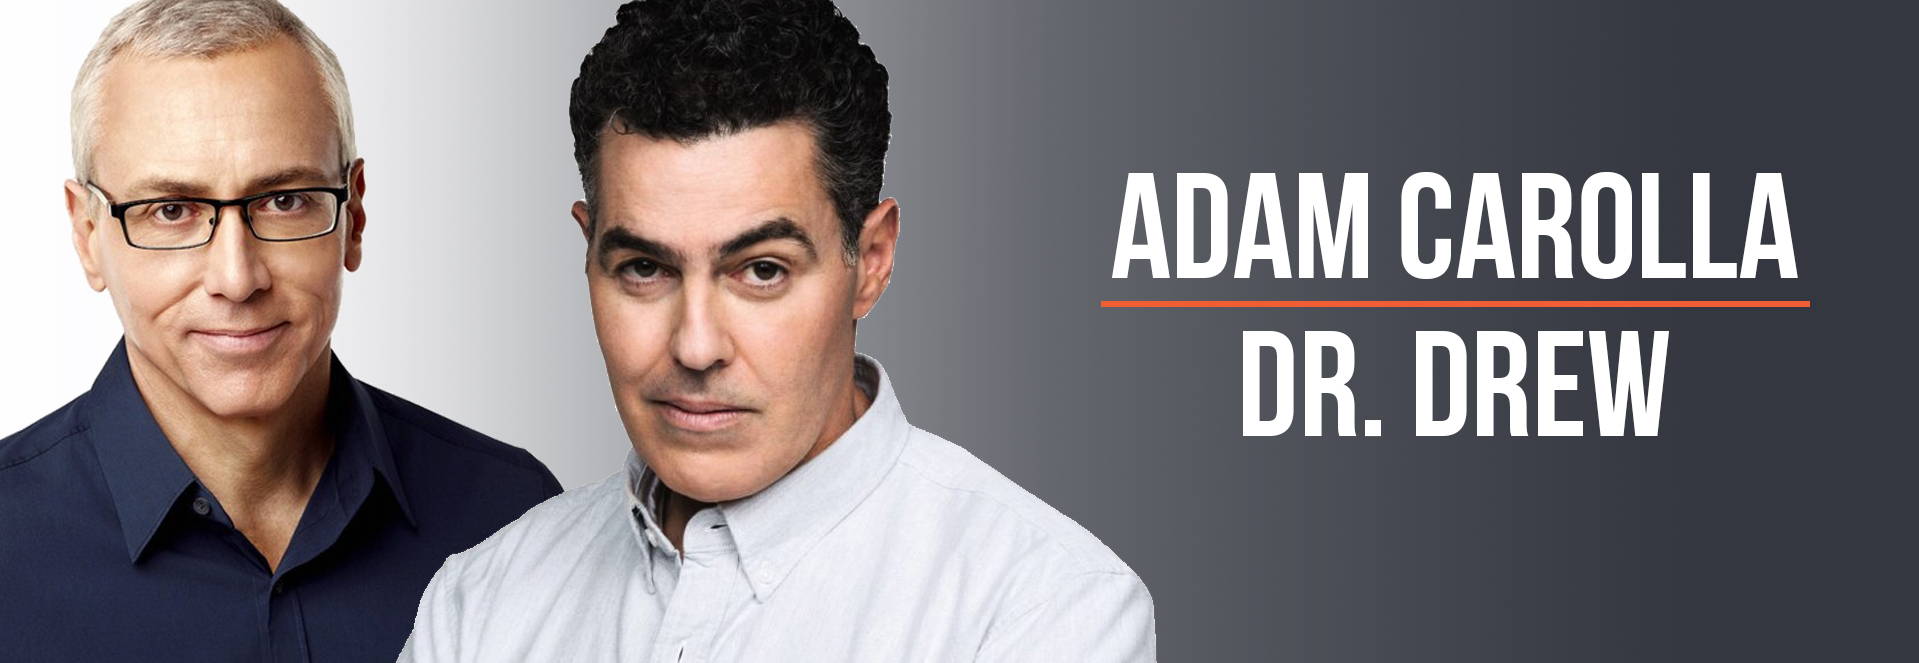 A picture of Doctor Drew standing next to Adam Carolla 